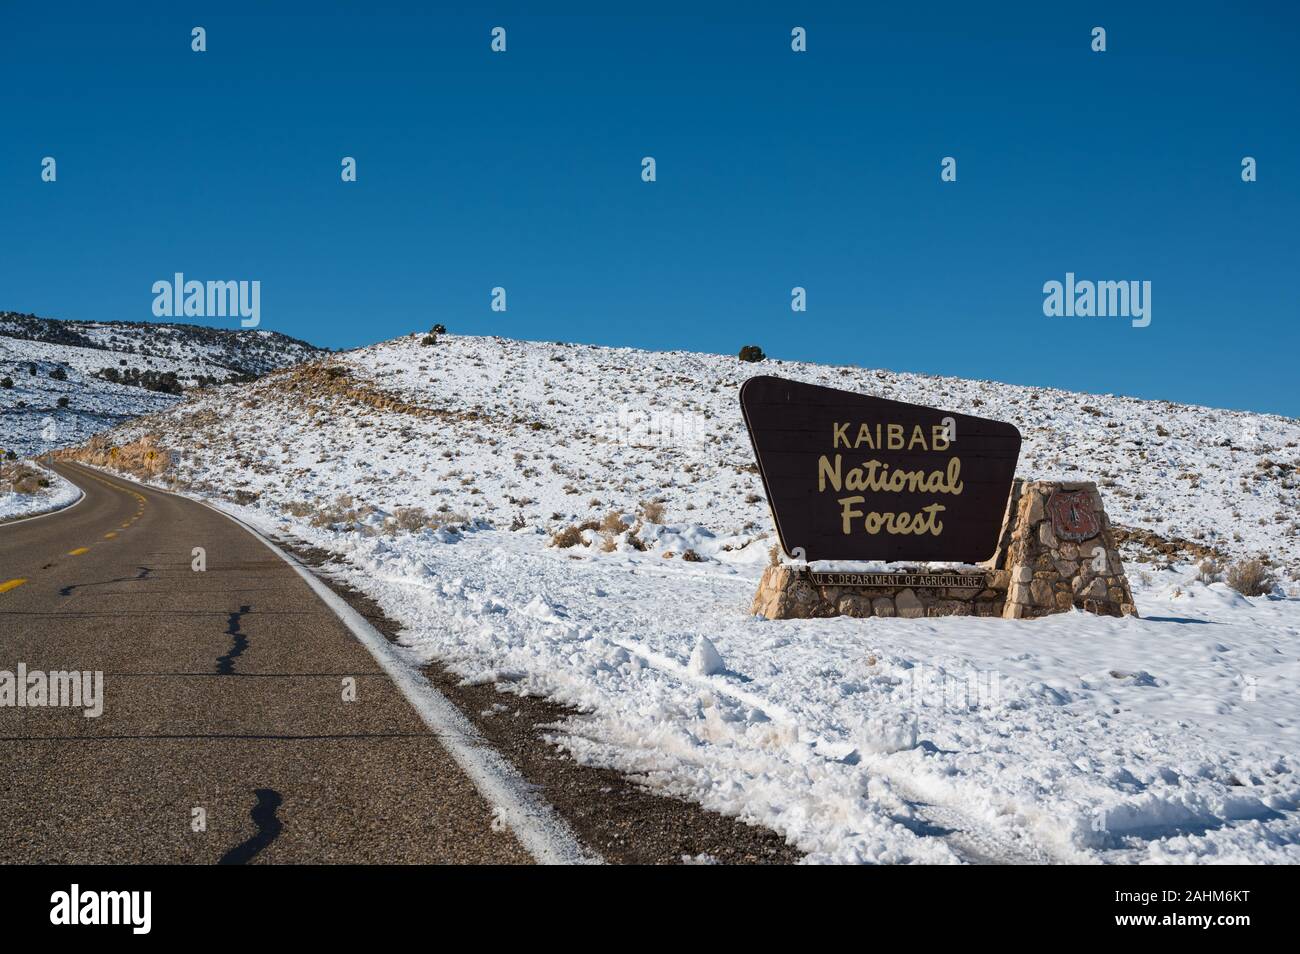 Kaibab National Forest sign in a snow covered winter landscape Stock Photo